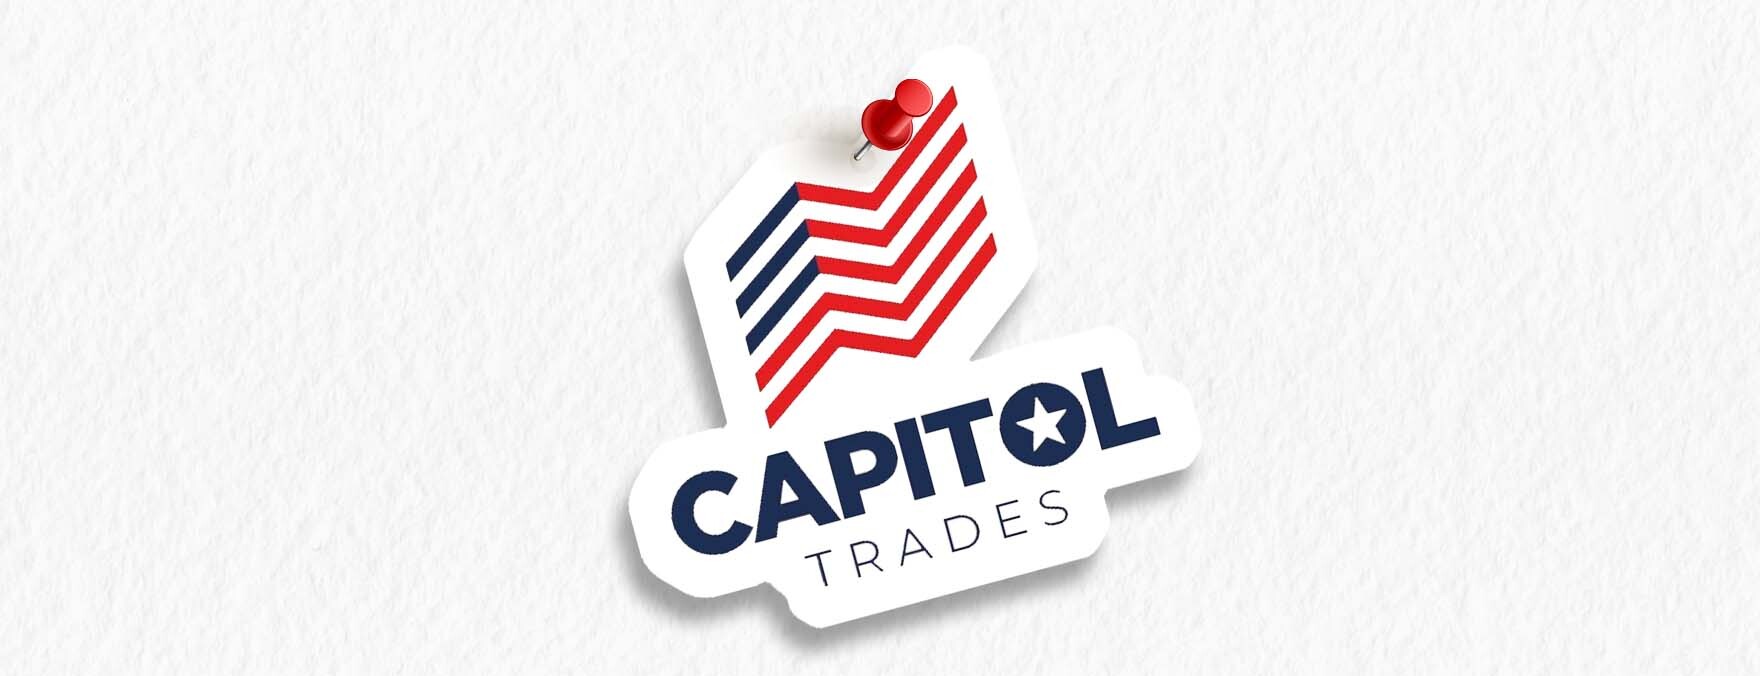 With a board pin, the Capitol Trades emblem is affixed on a white notice board.